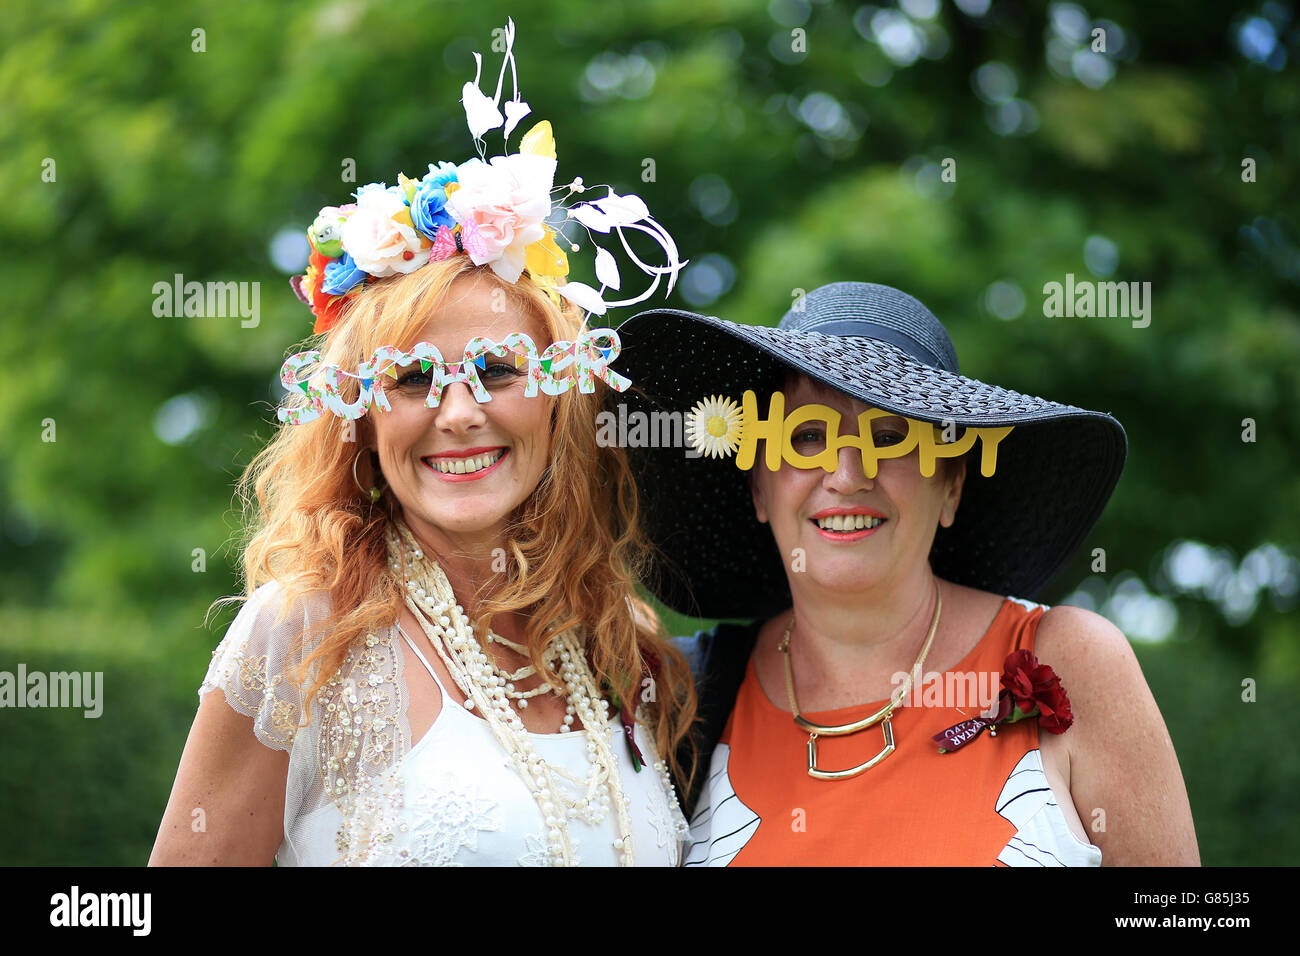 Horse Racing - Glorious Goodwood Festival 2015 - Day Three - Goodwood Racecourse. Female racegoers wearing comedy glasses before the days racing during day three of the Glorious Goodwood Festival, Chichester. Stock Photo